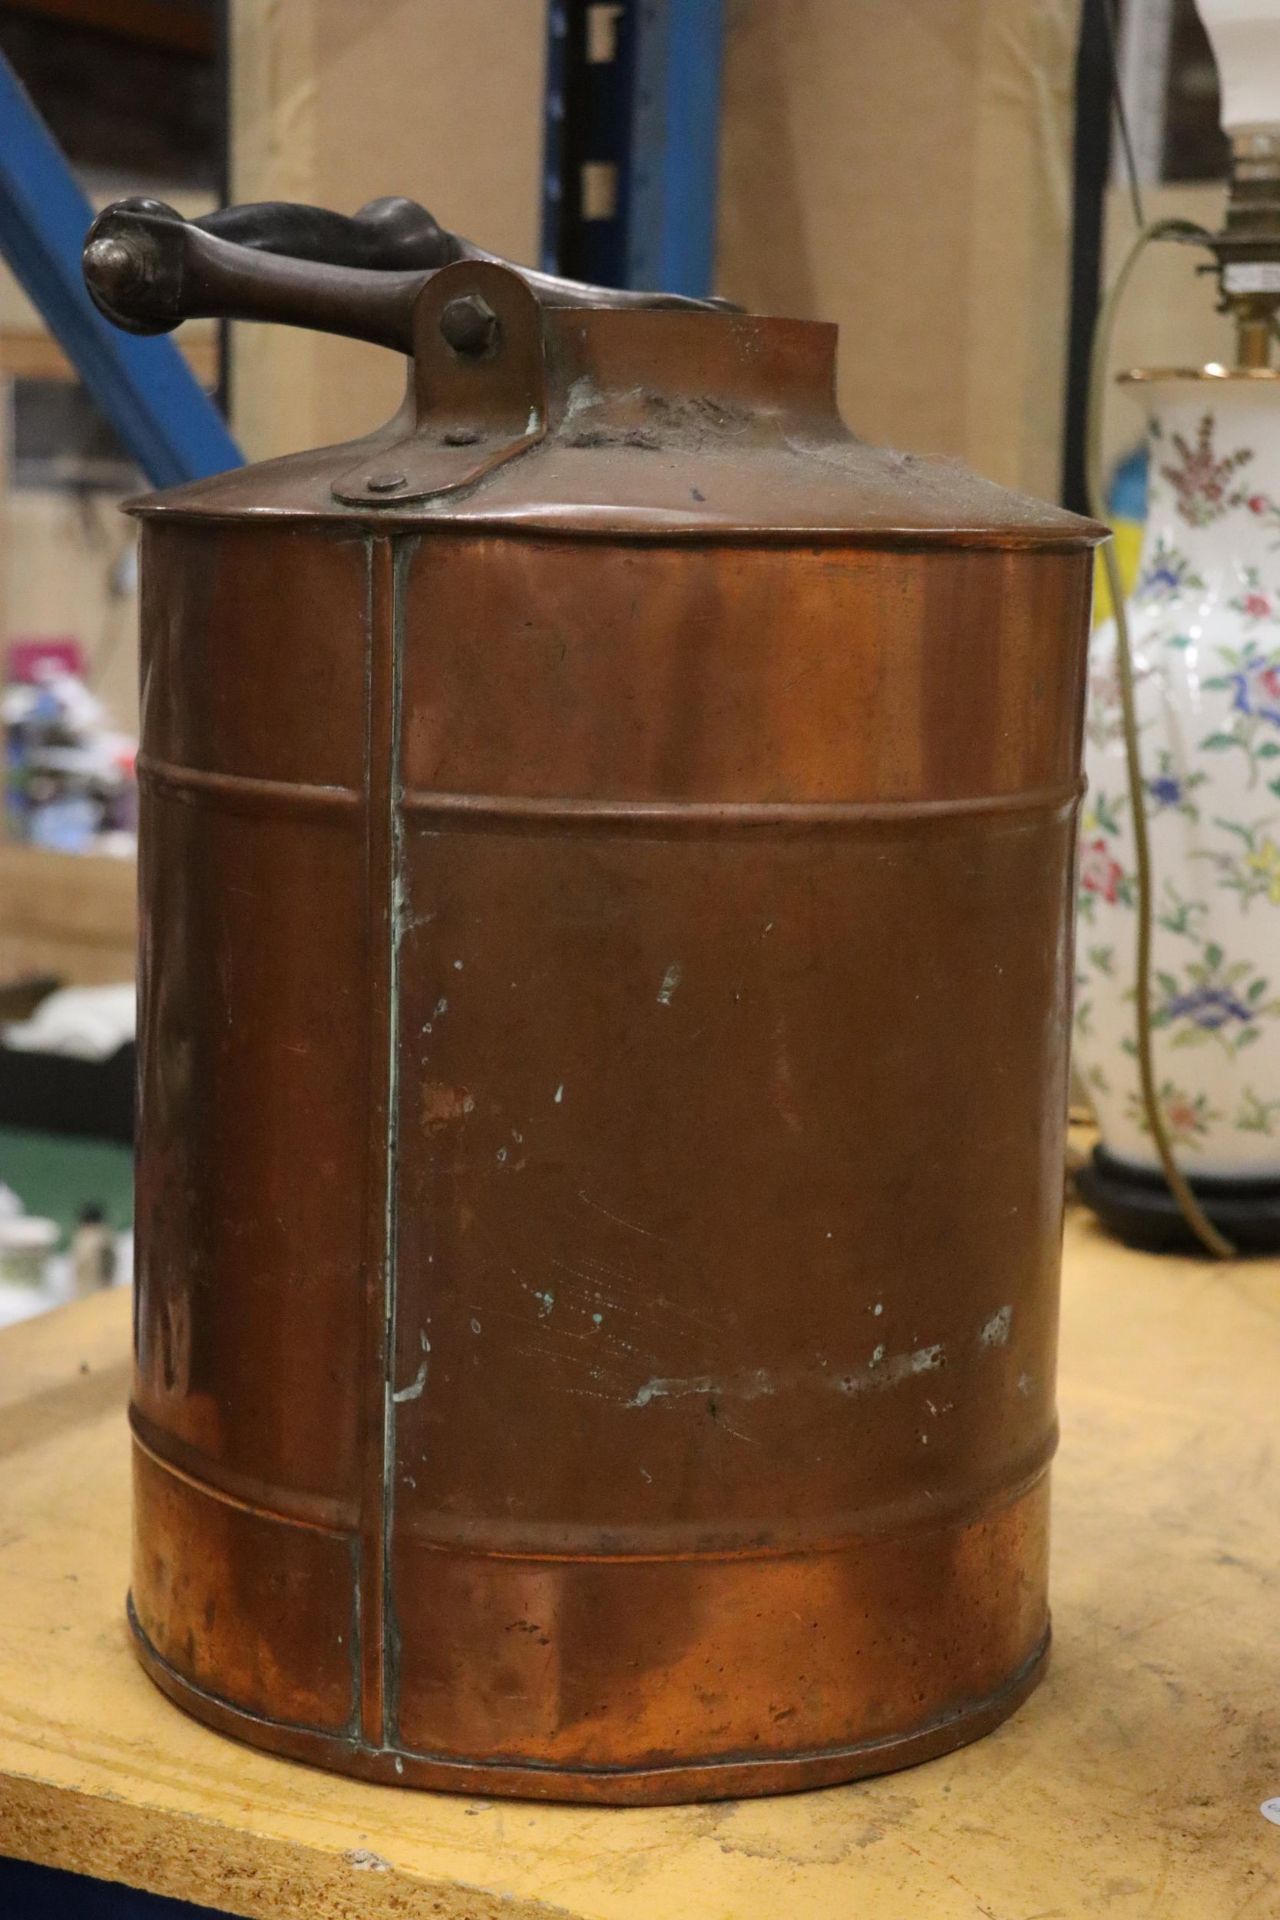 THREE PIECES OF VINTAGE COPPER TO INCLUDE A KETTLE, PLANTER AND BUCKET - Image 7 of 8